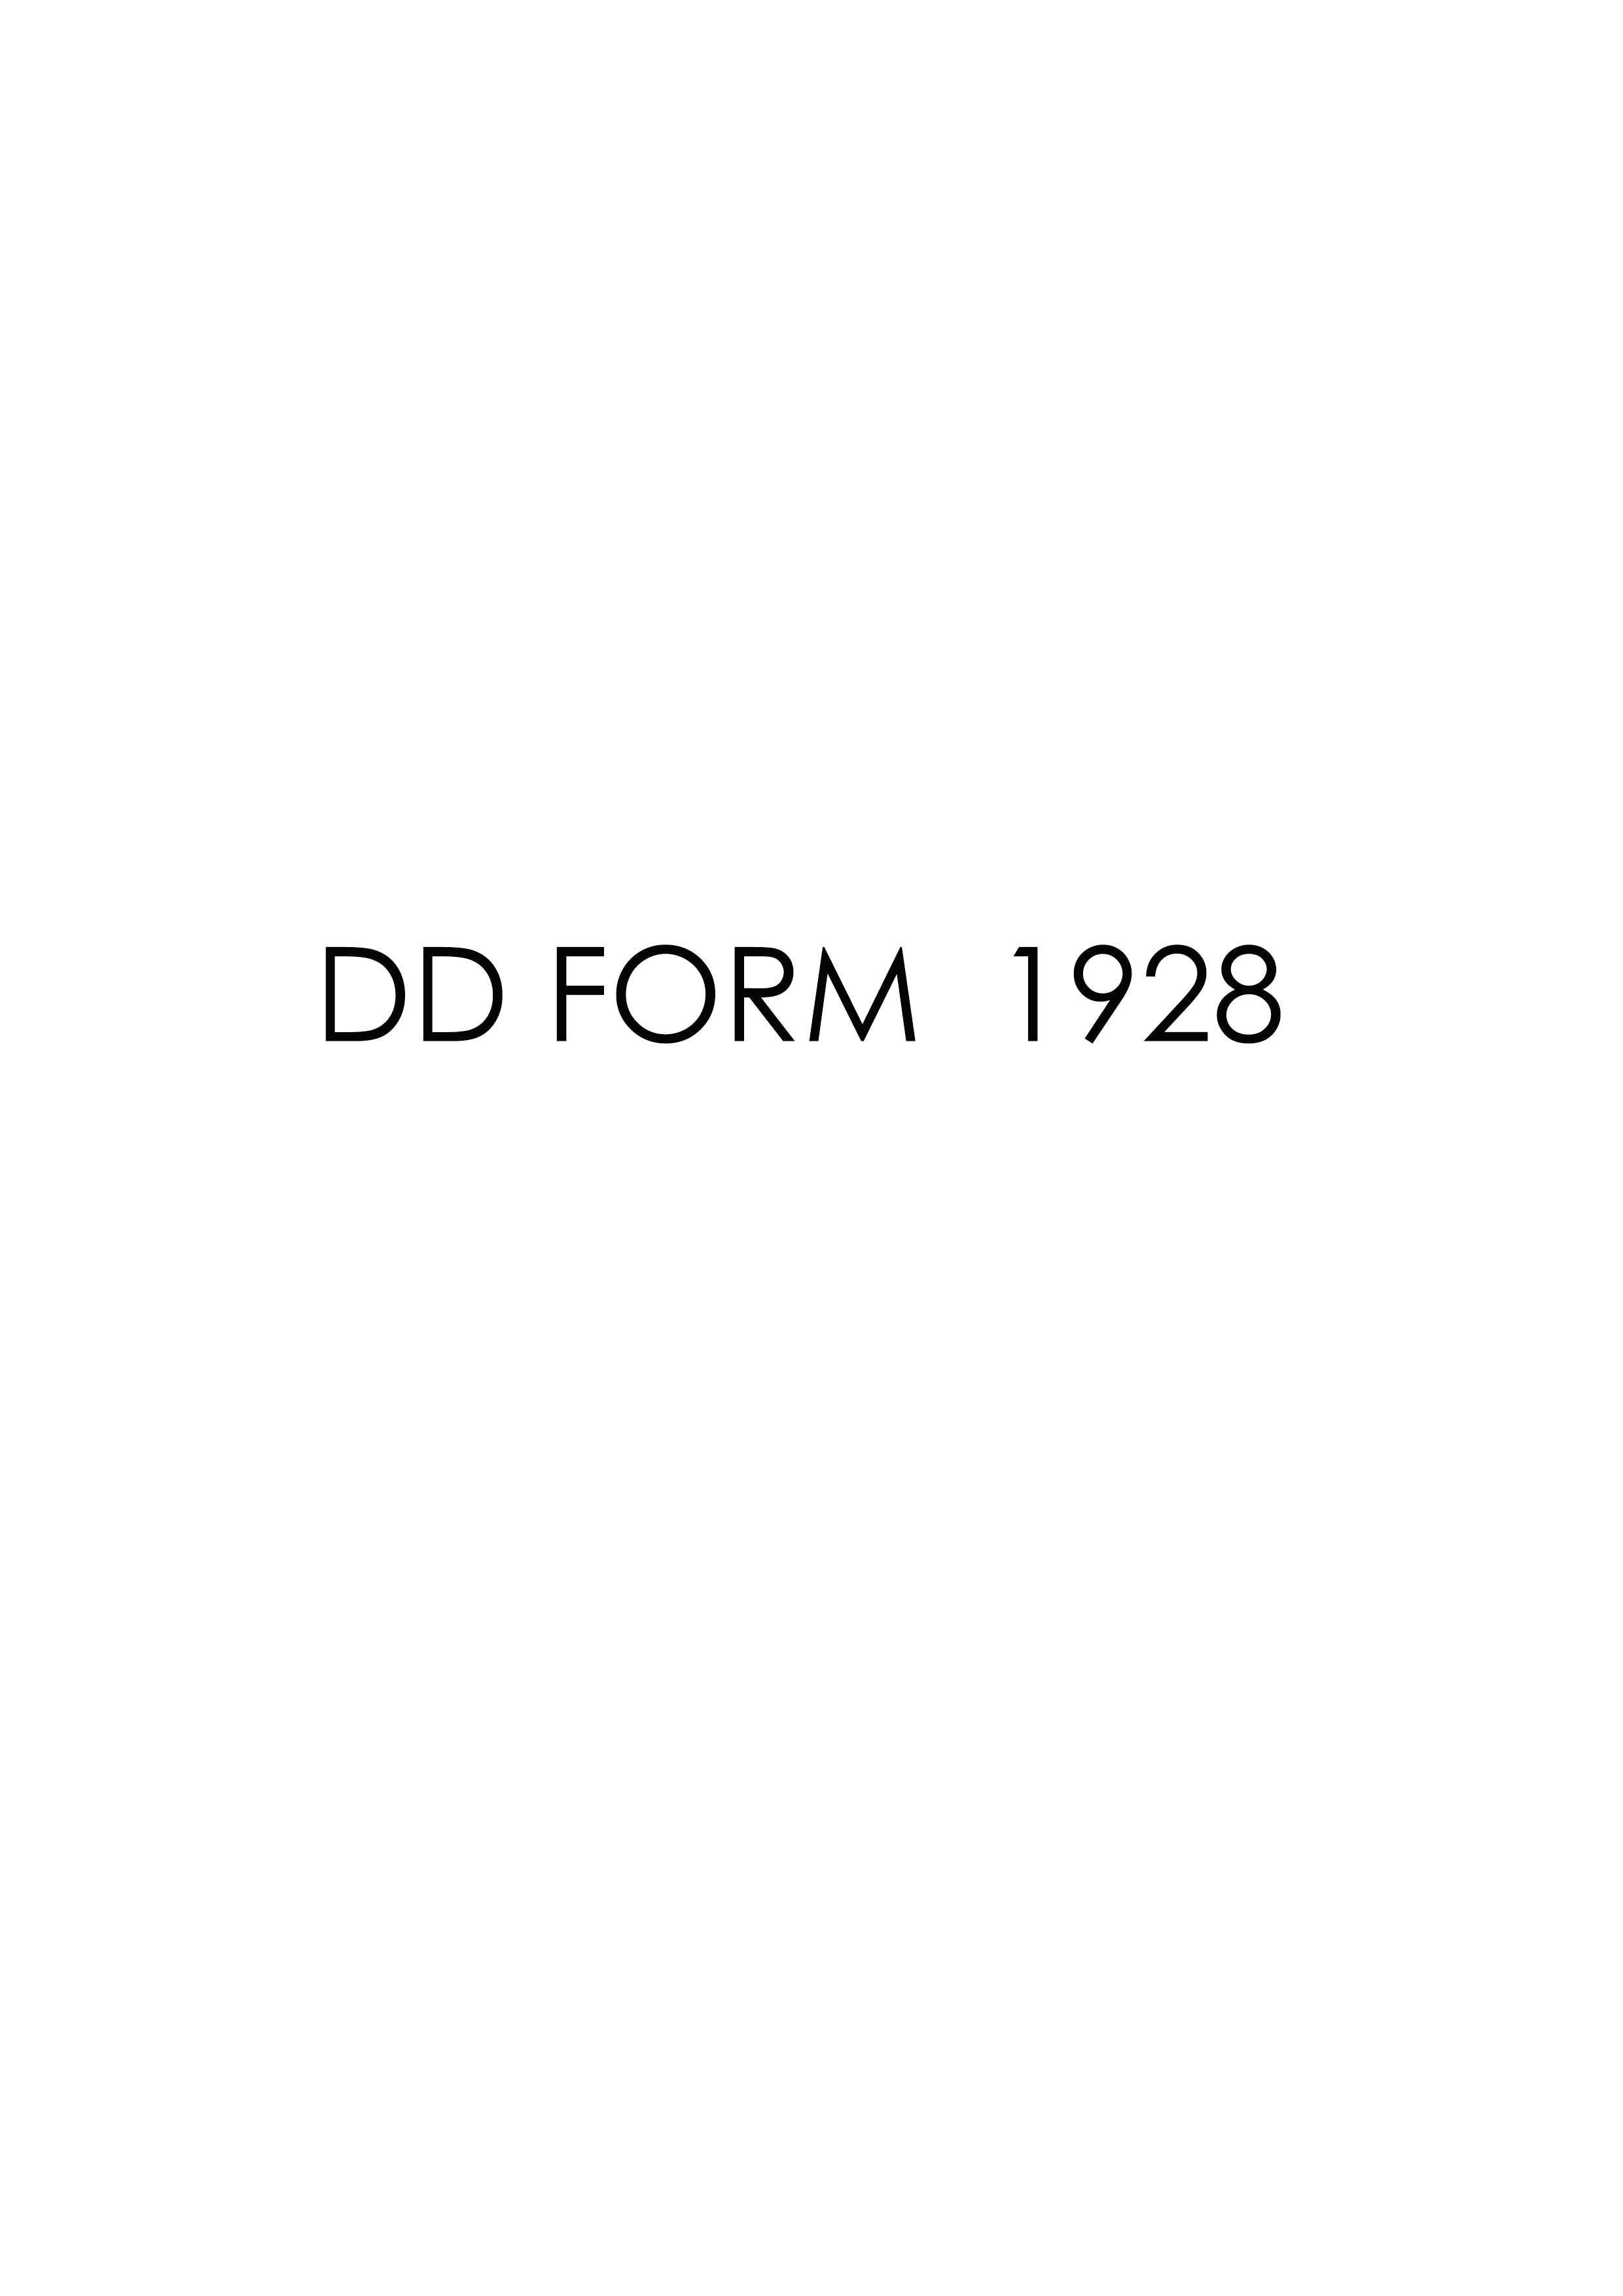 Download Fillable dd Form 1928